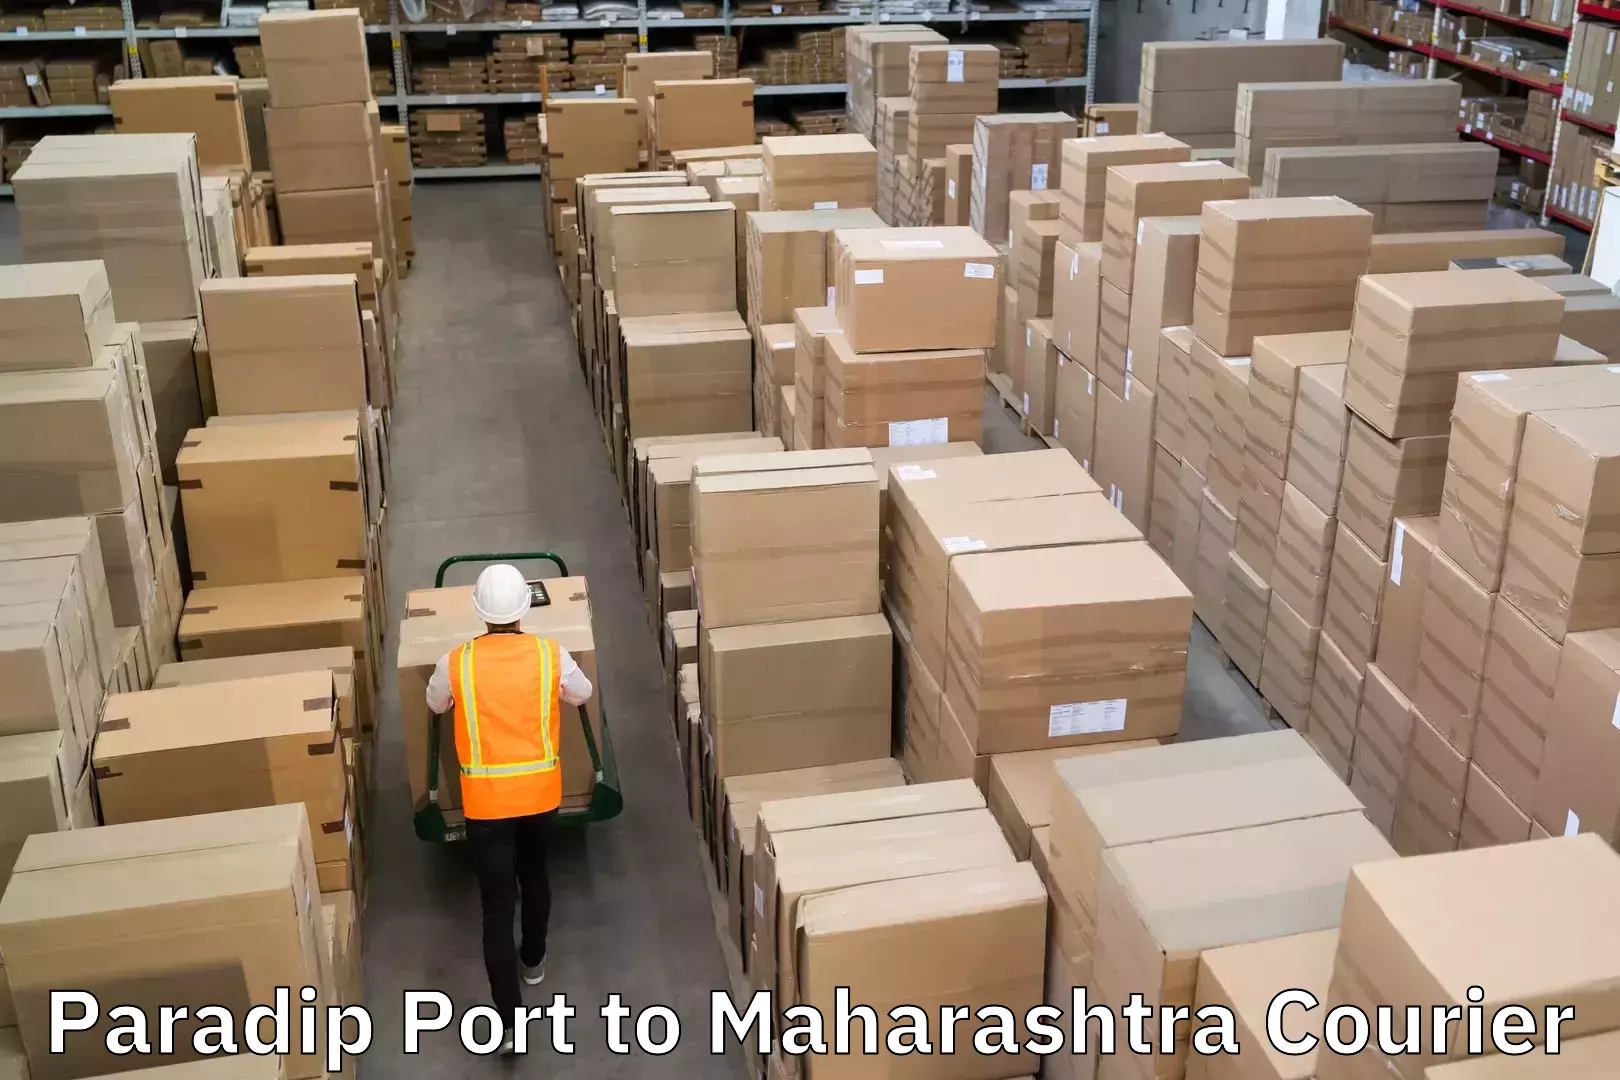 Comprehensive shipping network Paradip Port to Yavatmal